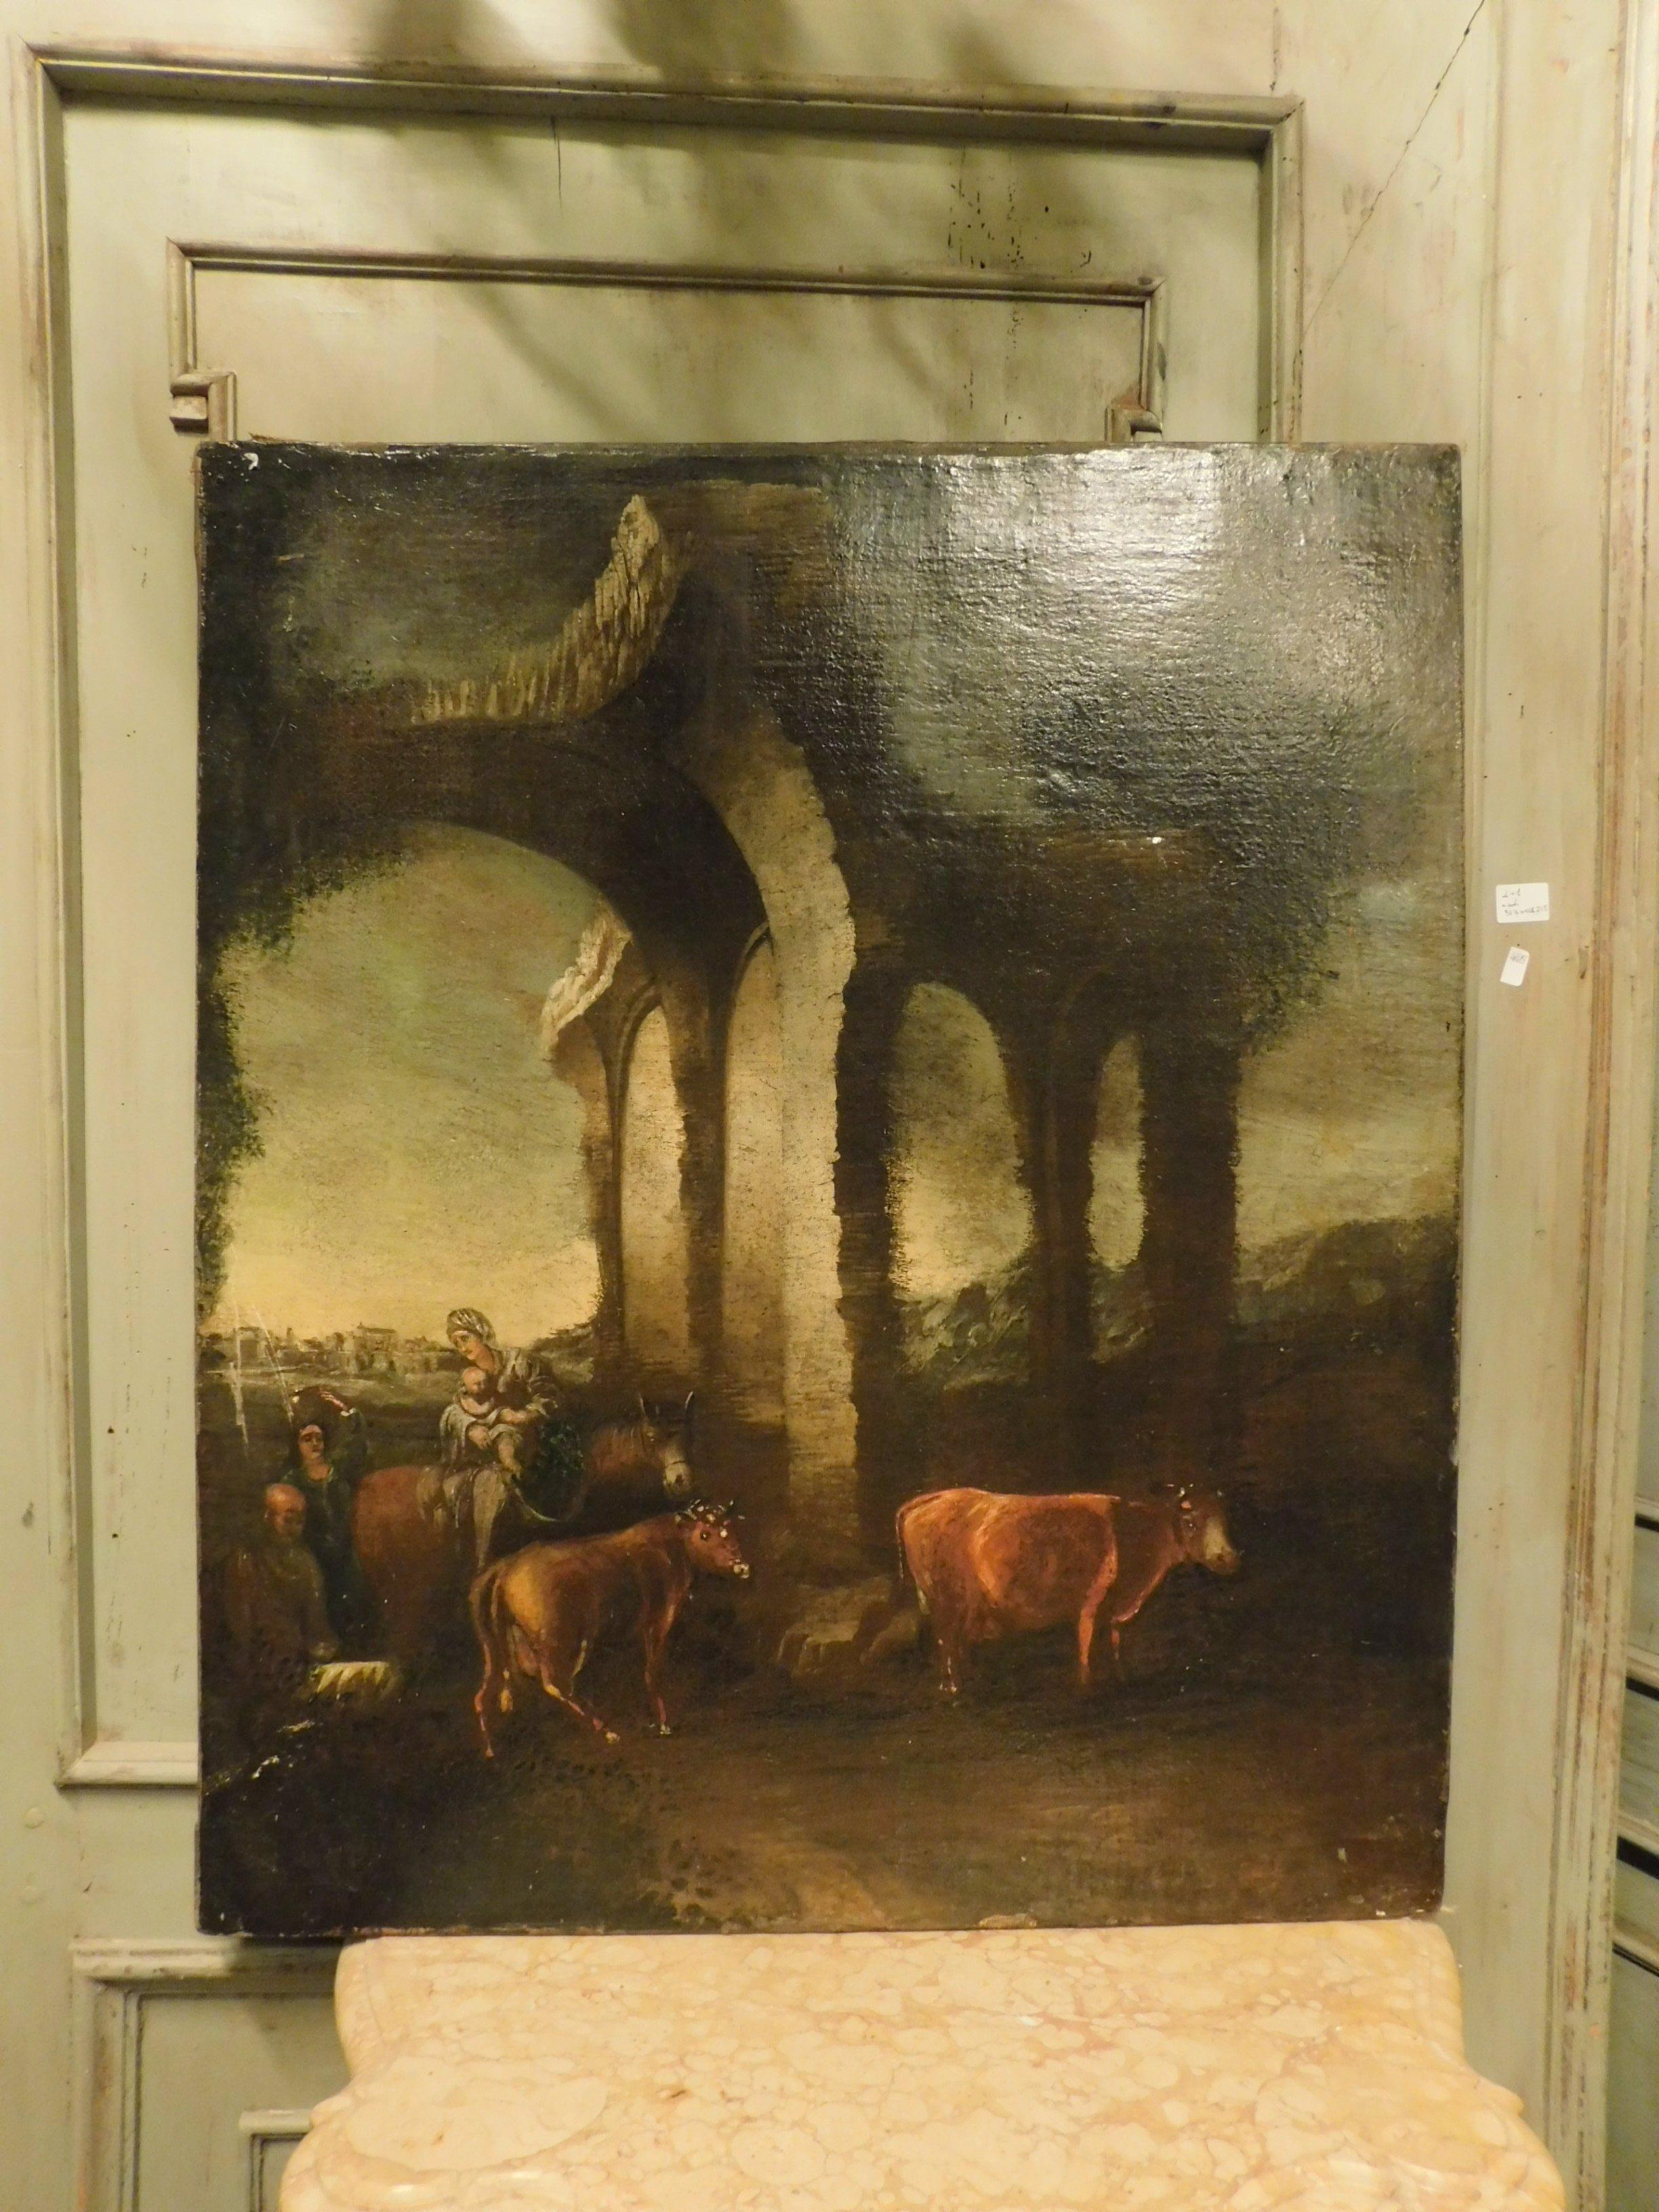 Ancient oil painting on canvas, depicting a rural landscape with classical architectural ruins, oxen and women in a common scene of the time, hand painted by an unknown author (without signature) in the period between the 18th and 19th centuries,